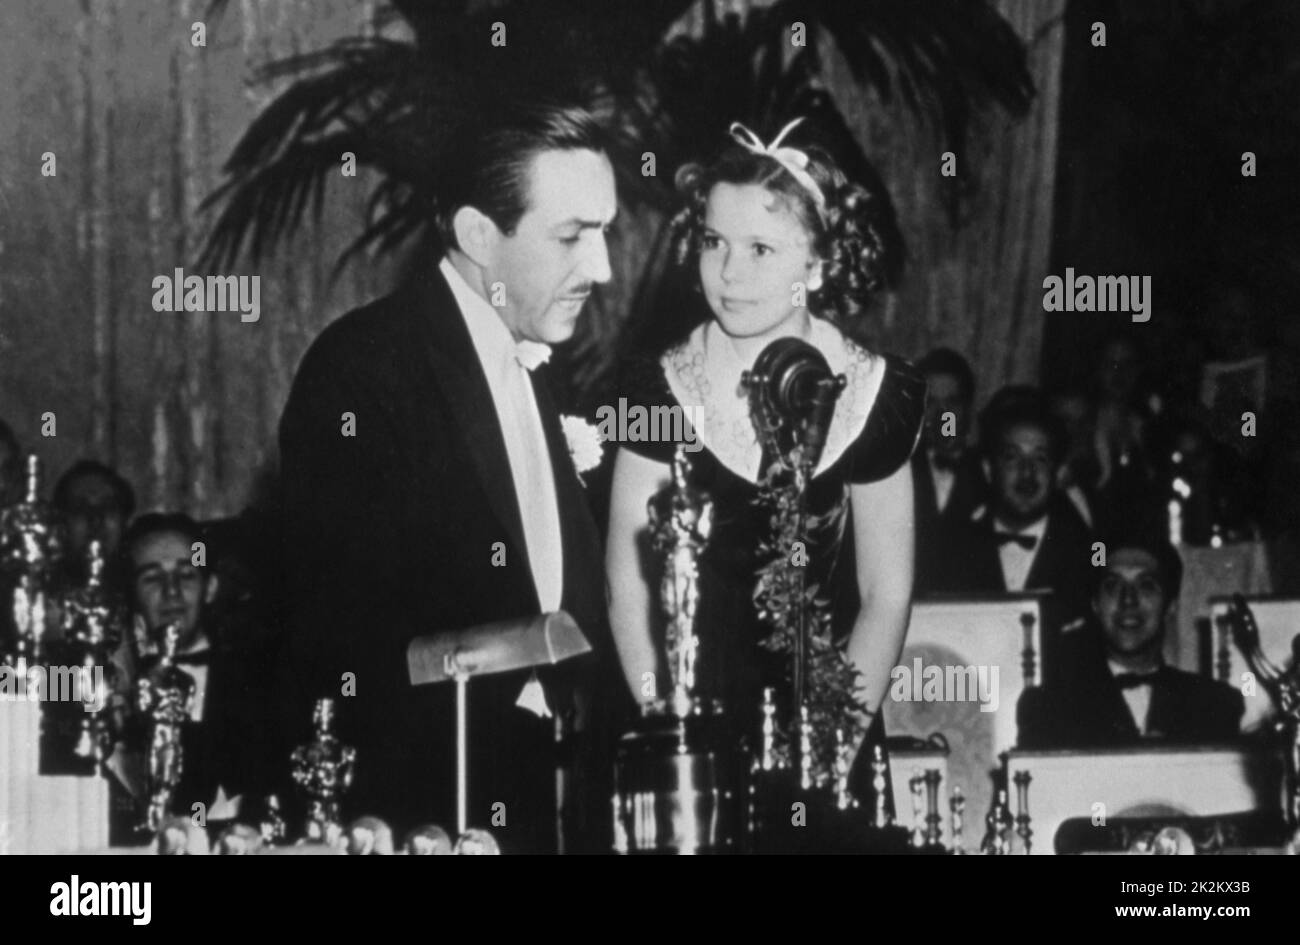 Shirley Temple and Walt Disney, Oscars ceremony in 1935. Shirley Temple receives the Juvenile Award In grateful recognition of her outstanding contribution to screen entertainment during the year 1934. Stock Photo